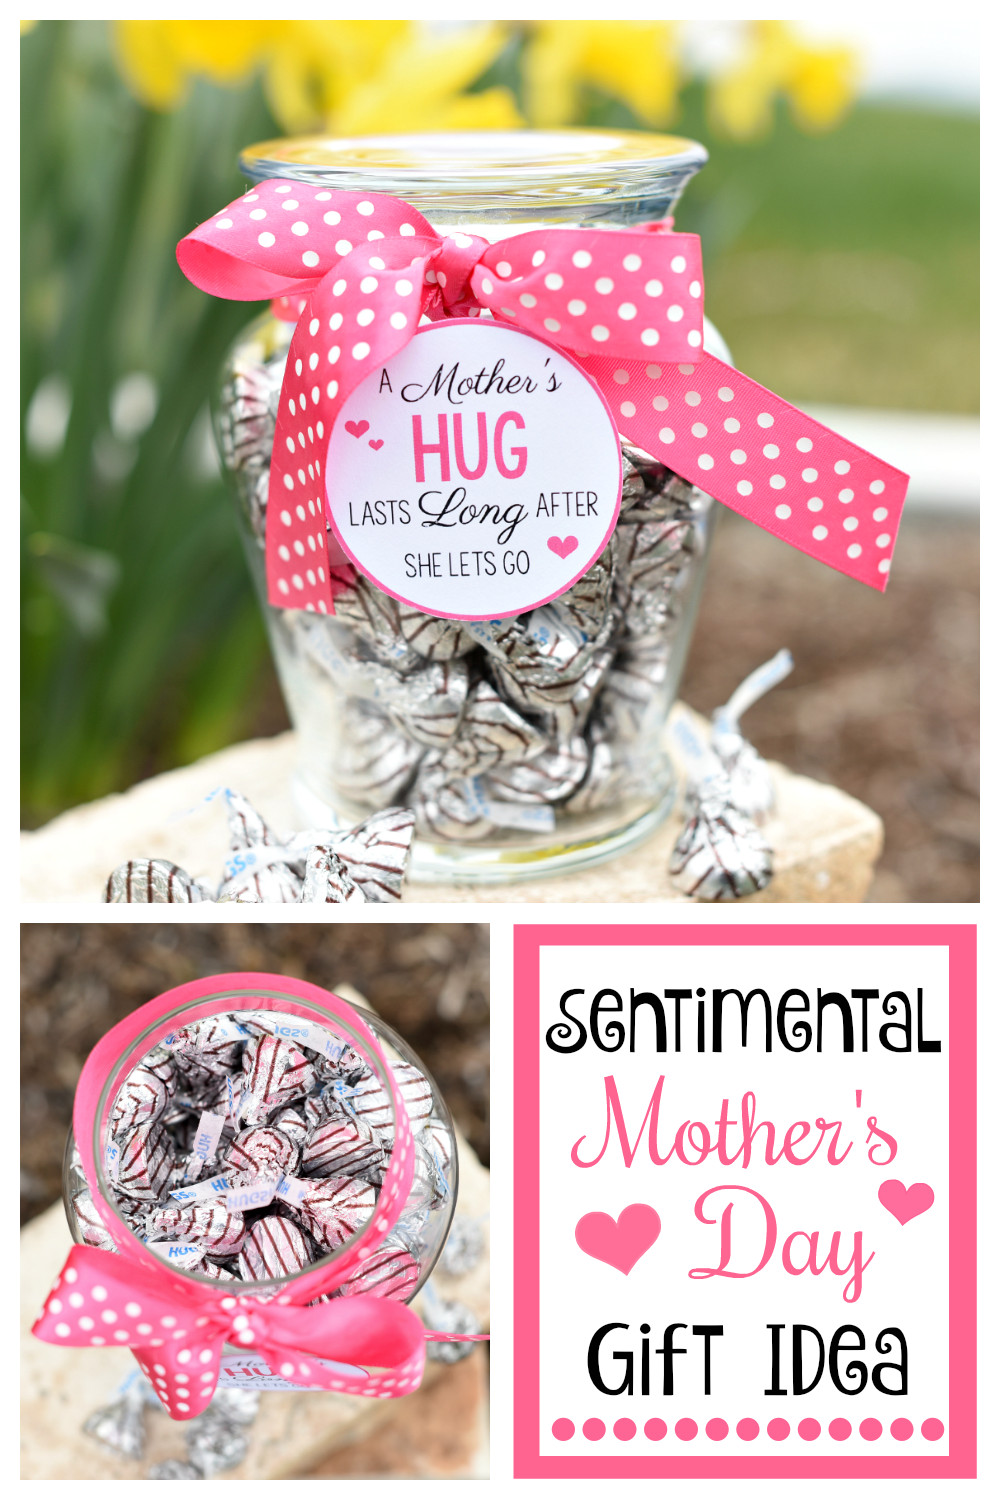 Mothers Day Gift Idears
 Sentimental Gift Ideas for Mother s Day – Fun Squared